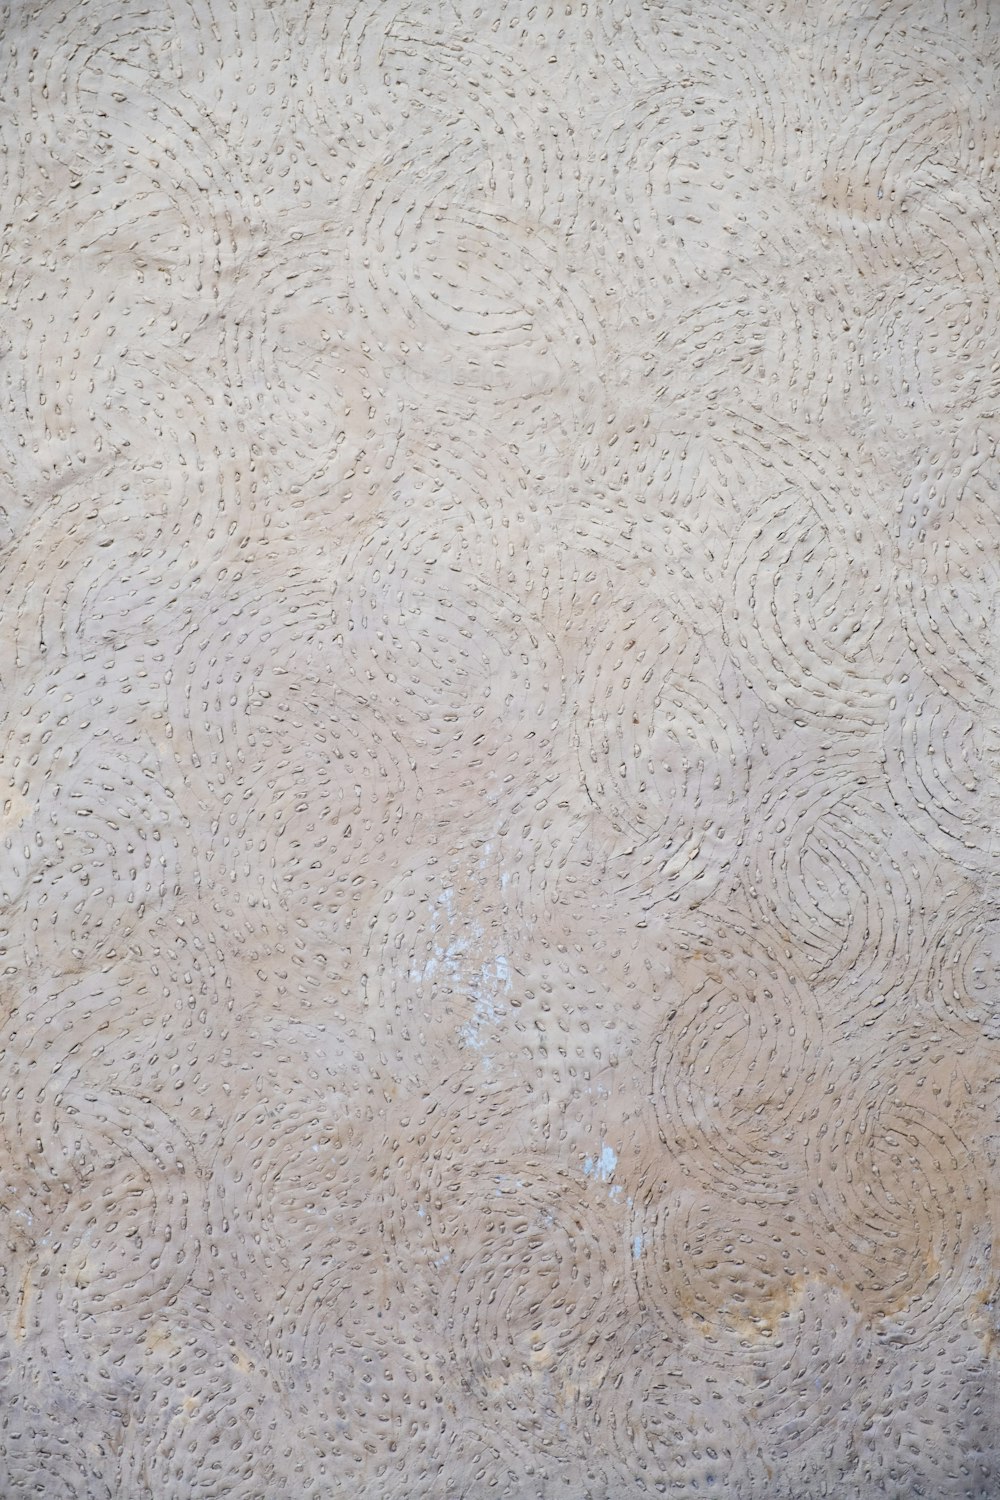 a close up view of a tile floor with circles on it